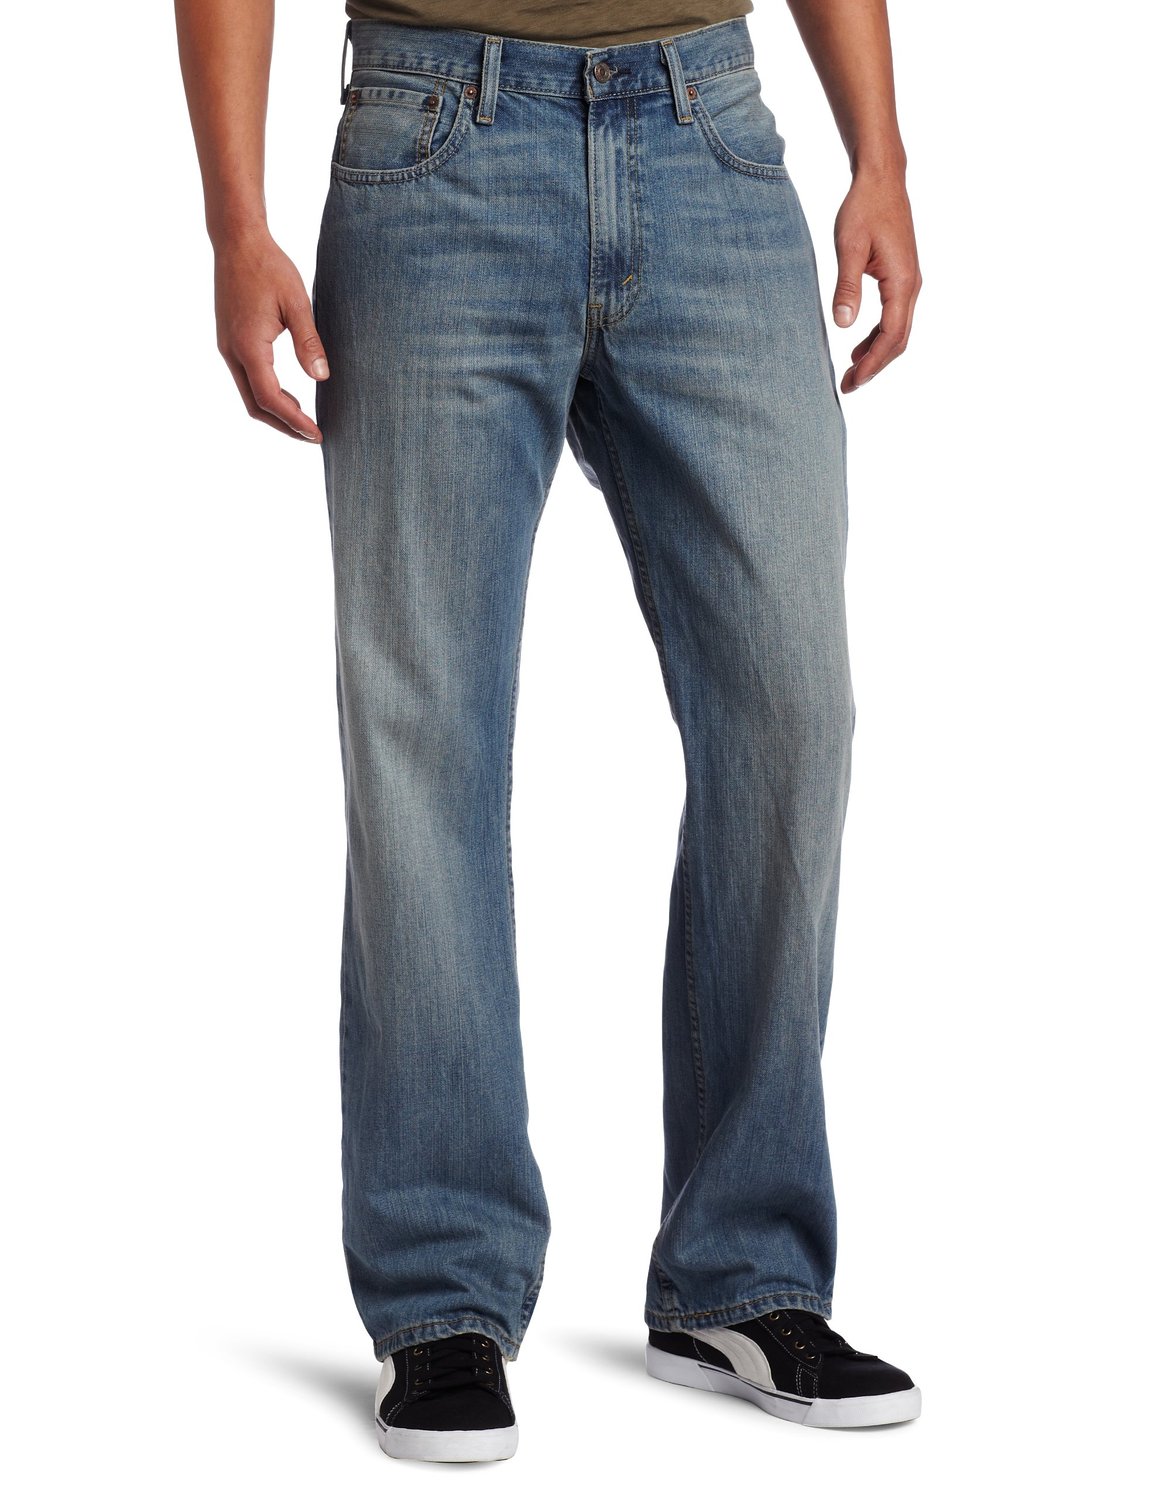 Levis 569 Loose Straight Fit Jeans - Mens Urban Clothing